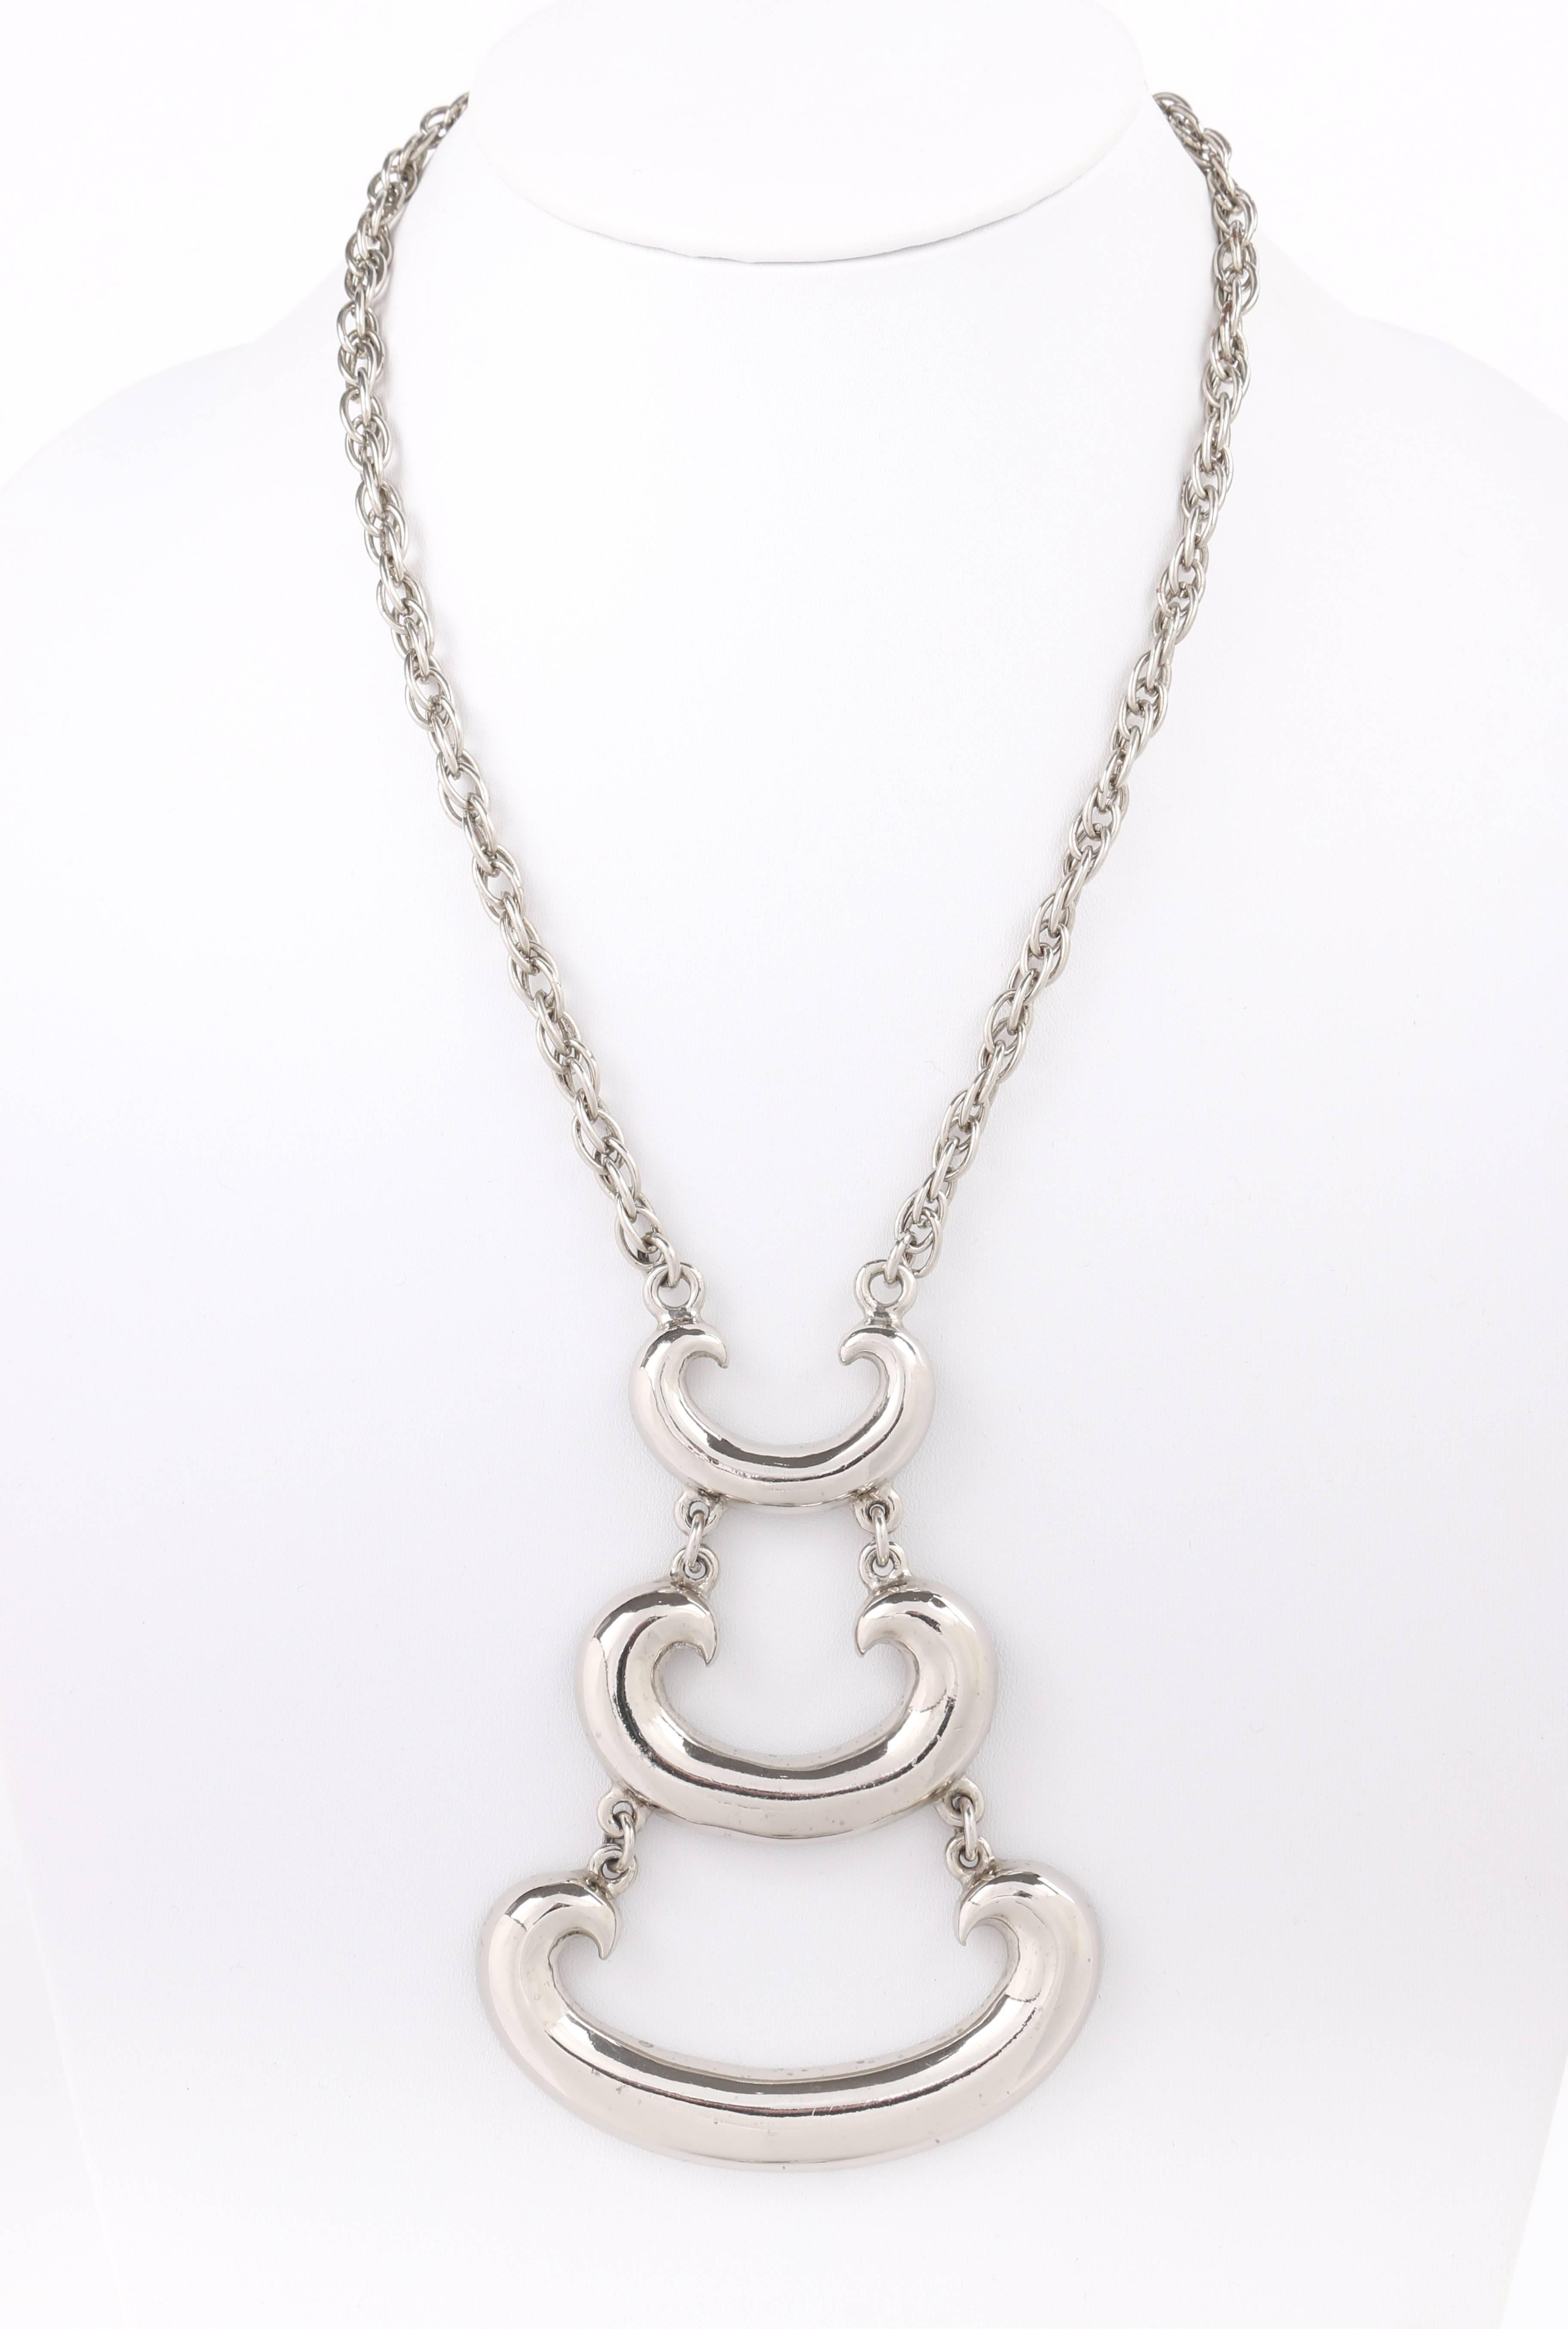 Vintage c.1960's silver modernist tiered pendant statement necklace. Large modernist pendant made up of three polished silver-toned metal curved shapes in varying sizes. Each tier is suspended by two o-rings. Pendant is suspended from a silver-toned